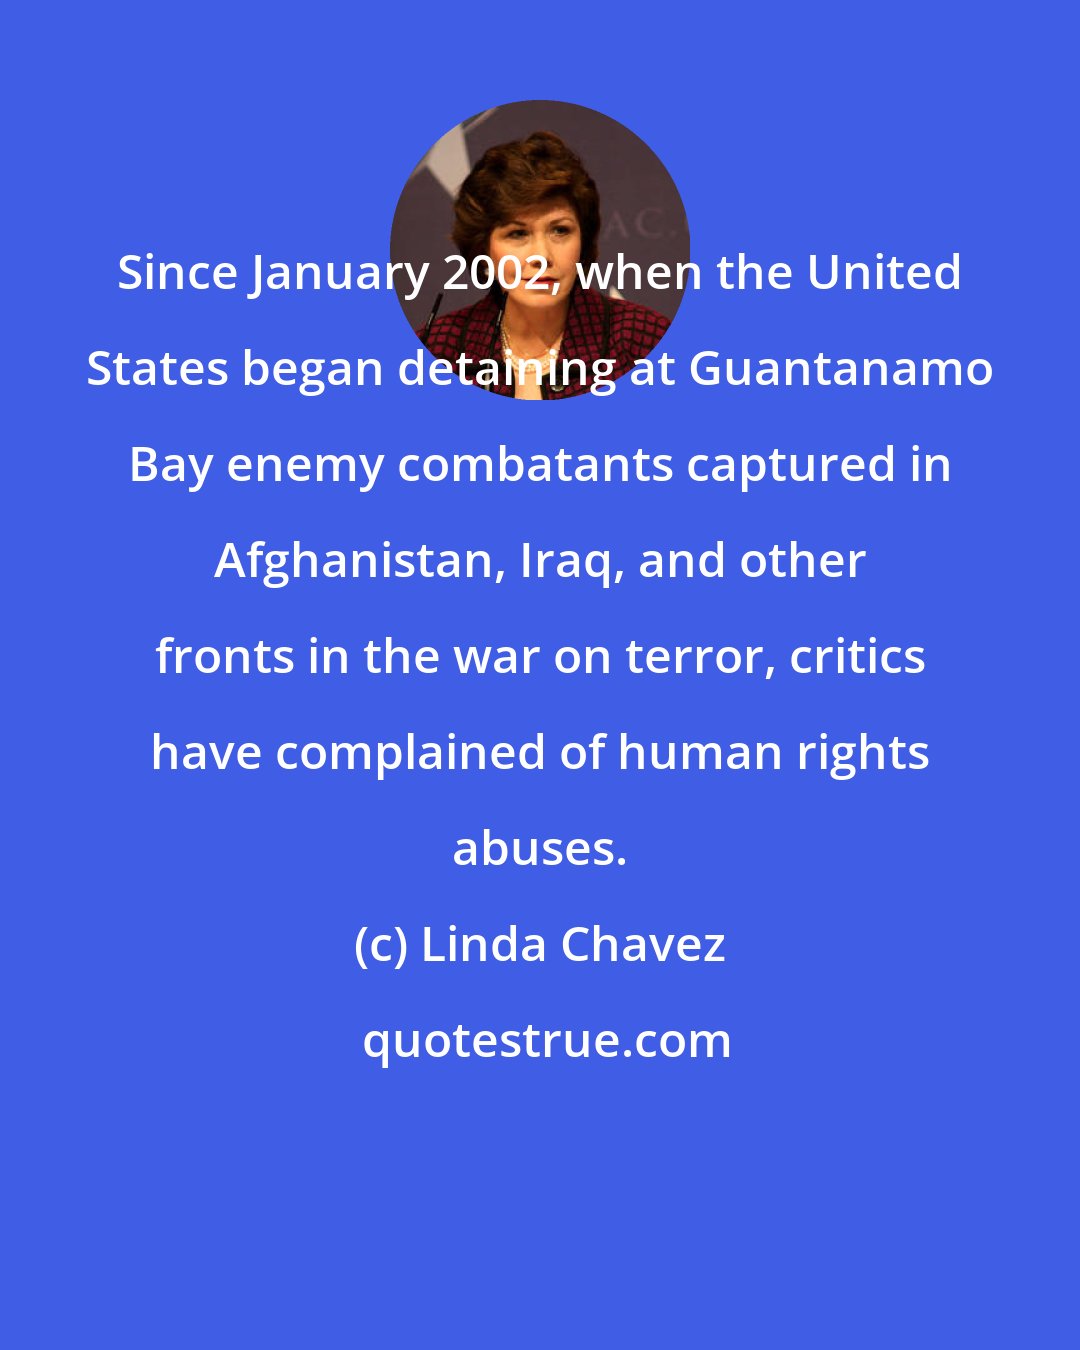 Linda Chavez: Since January 2002, when the United States began detaining at Guantanamo Bay enemy combatants captured in Afghanistan, Iraq, and other fronts in the war on terror, critics have complained of human rights abuses.